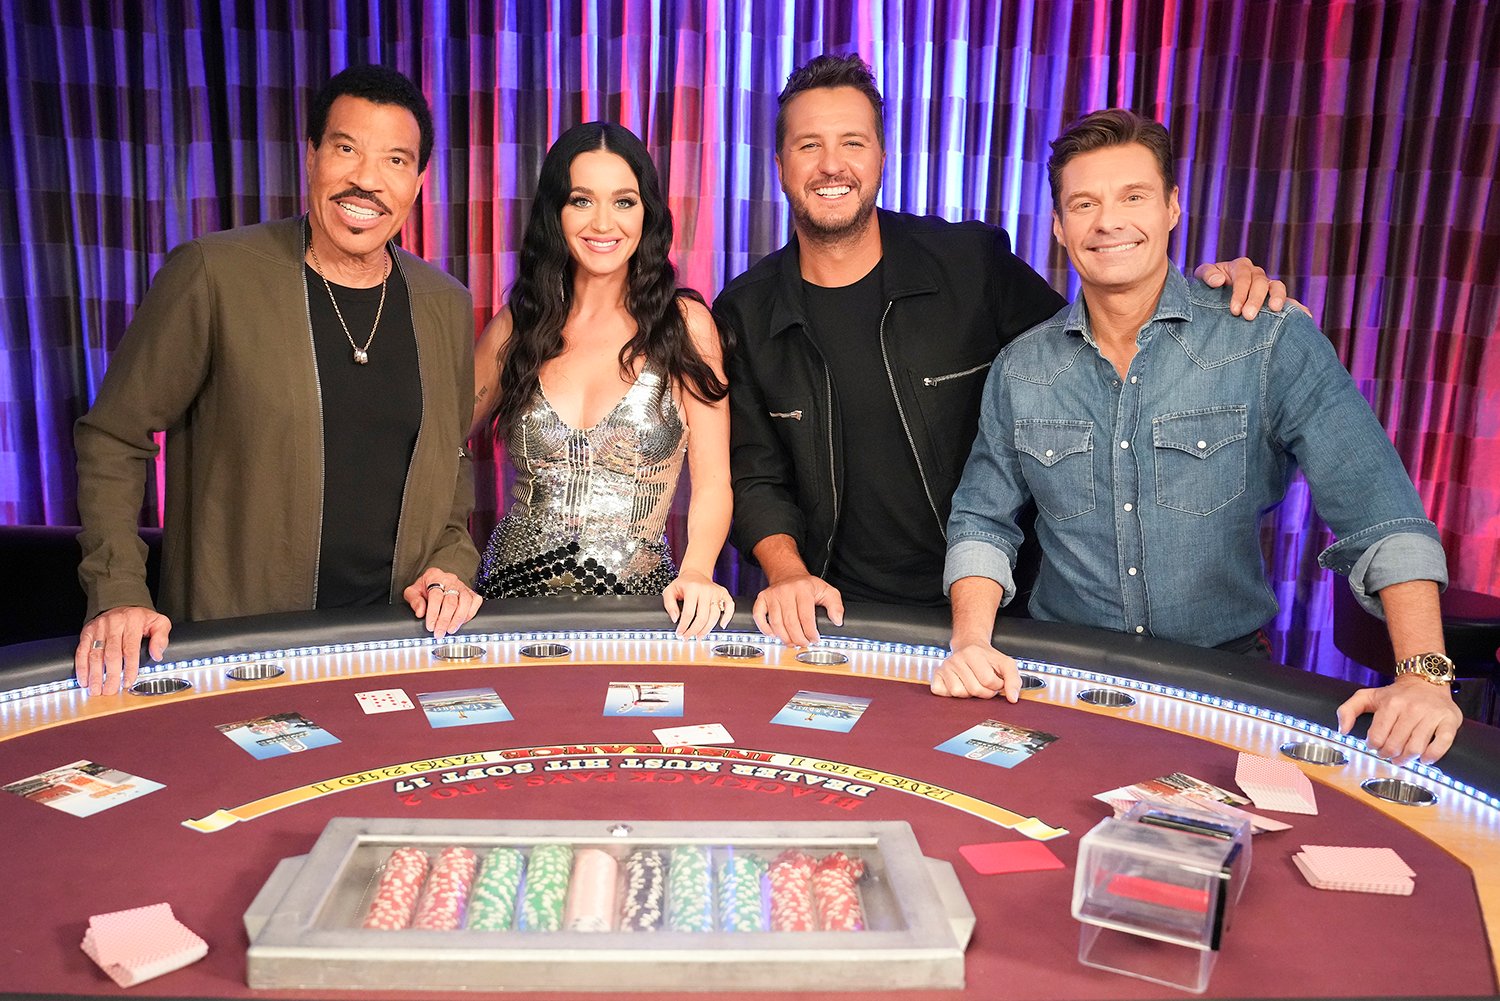 Lionel Richie, Katy Perry, Luke Bryan, and Ryan Seacrest stand around a card table in American Idol Season 21 promo image